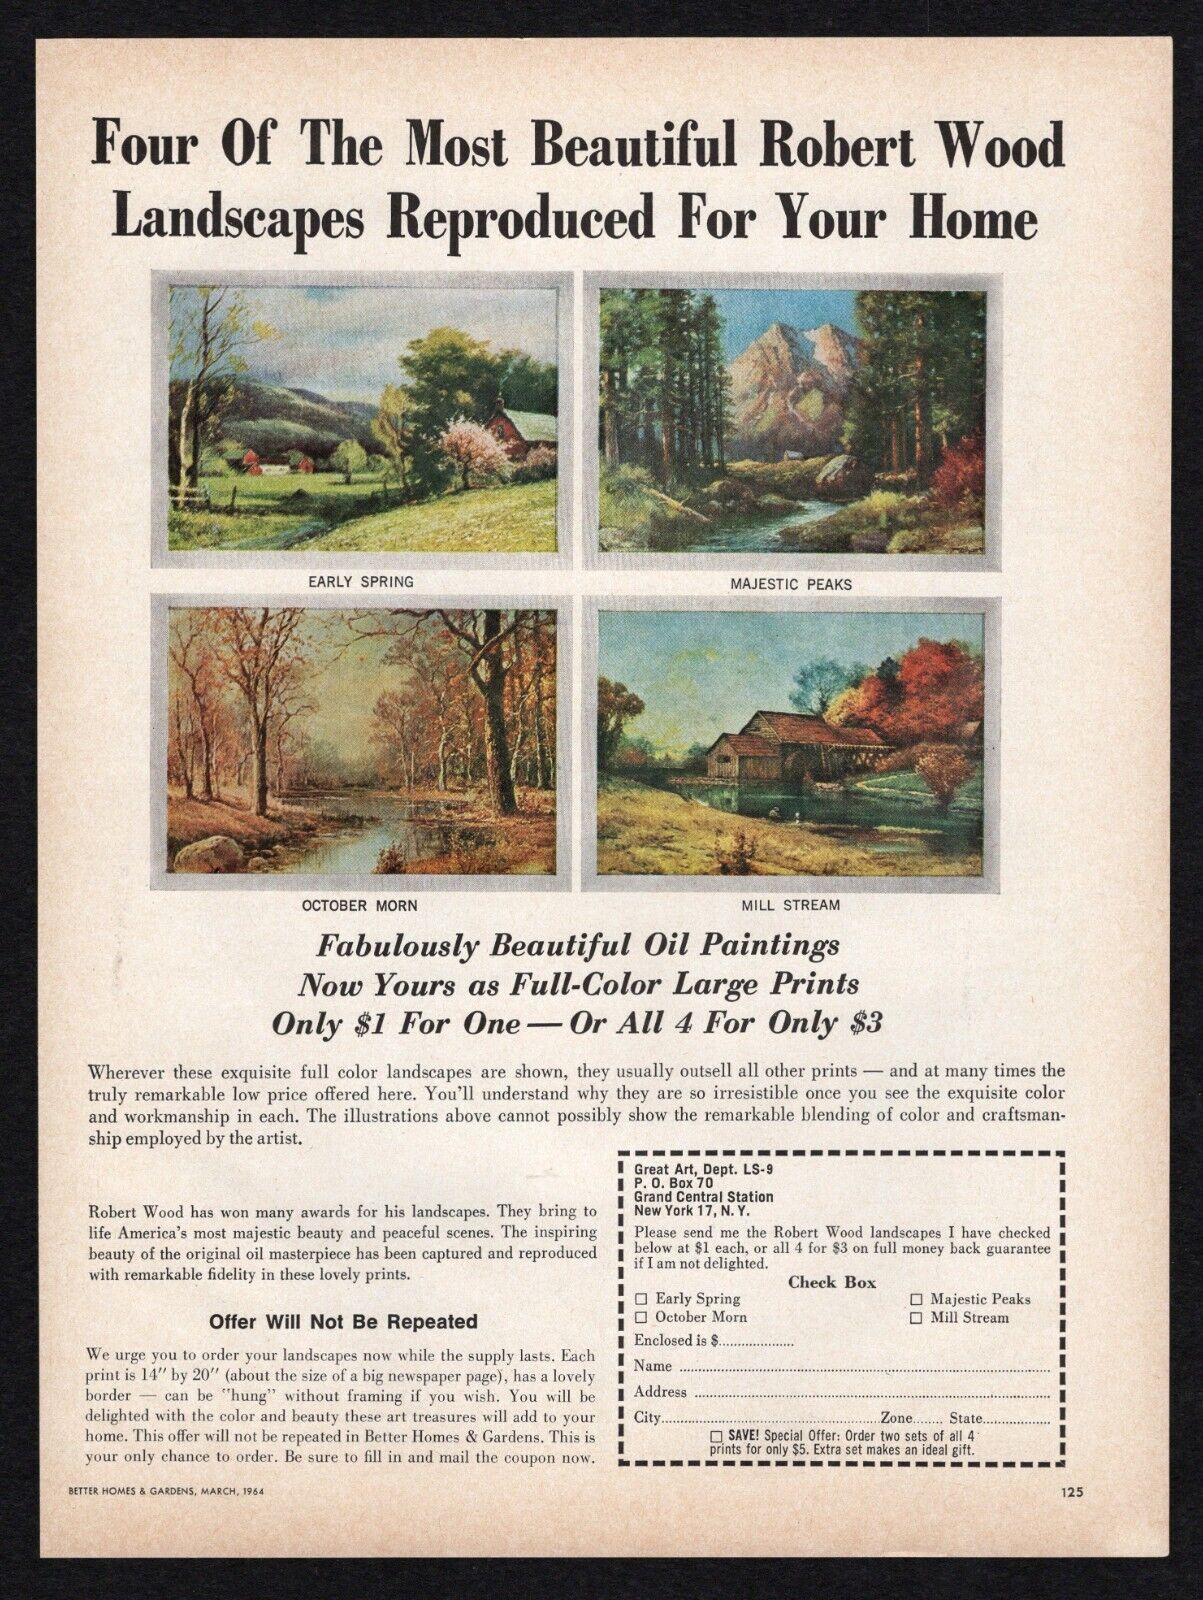 1964 Robert Wood Landscapes Reproduced Oil Paintings Full Color Large Print Ad